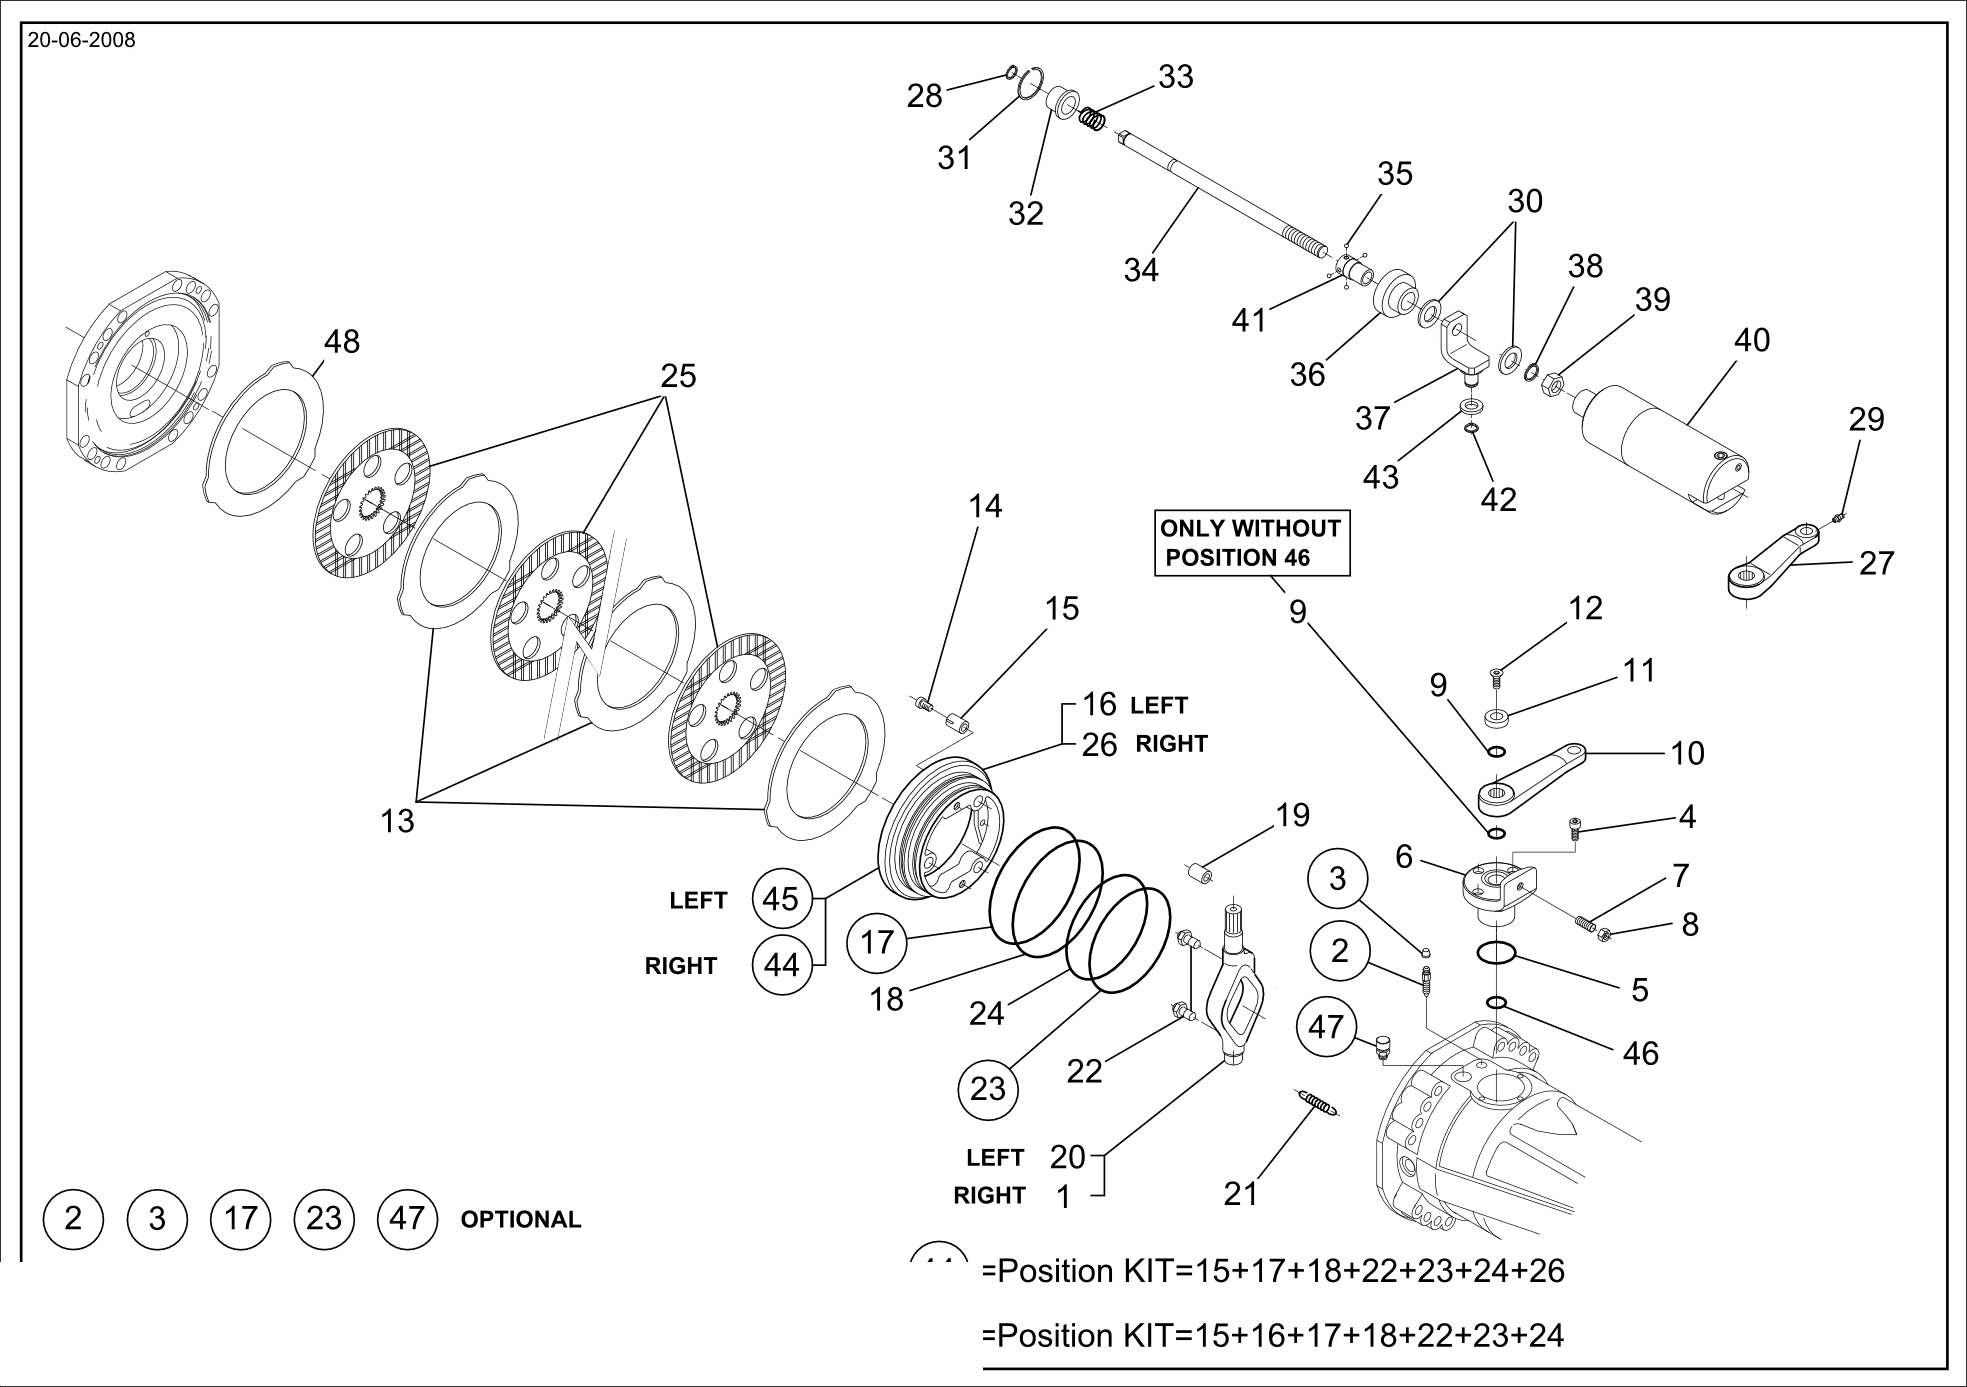 drawing for GHH 1202-0105 - SUPPORT (figure 1)